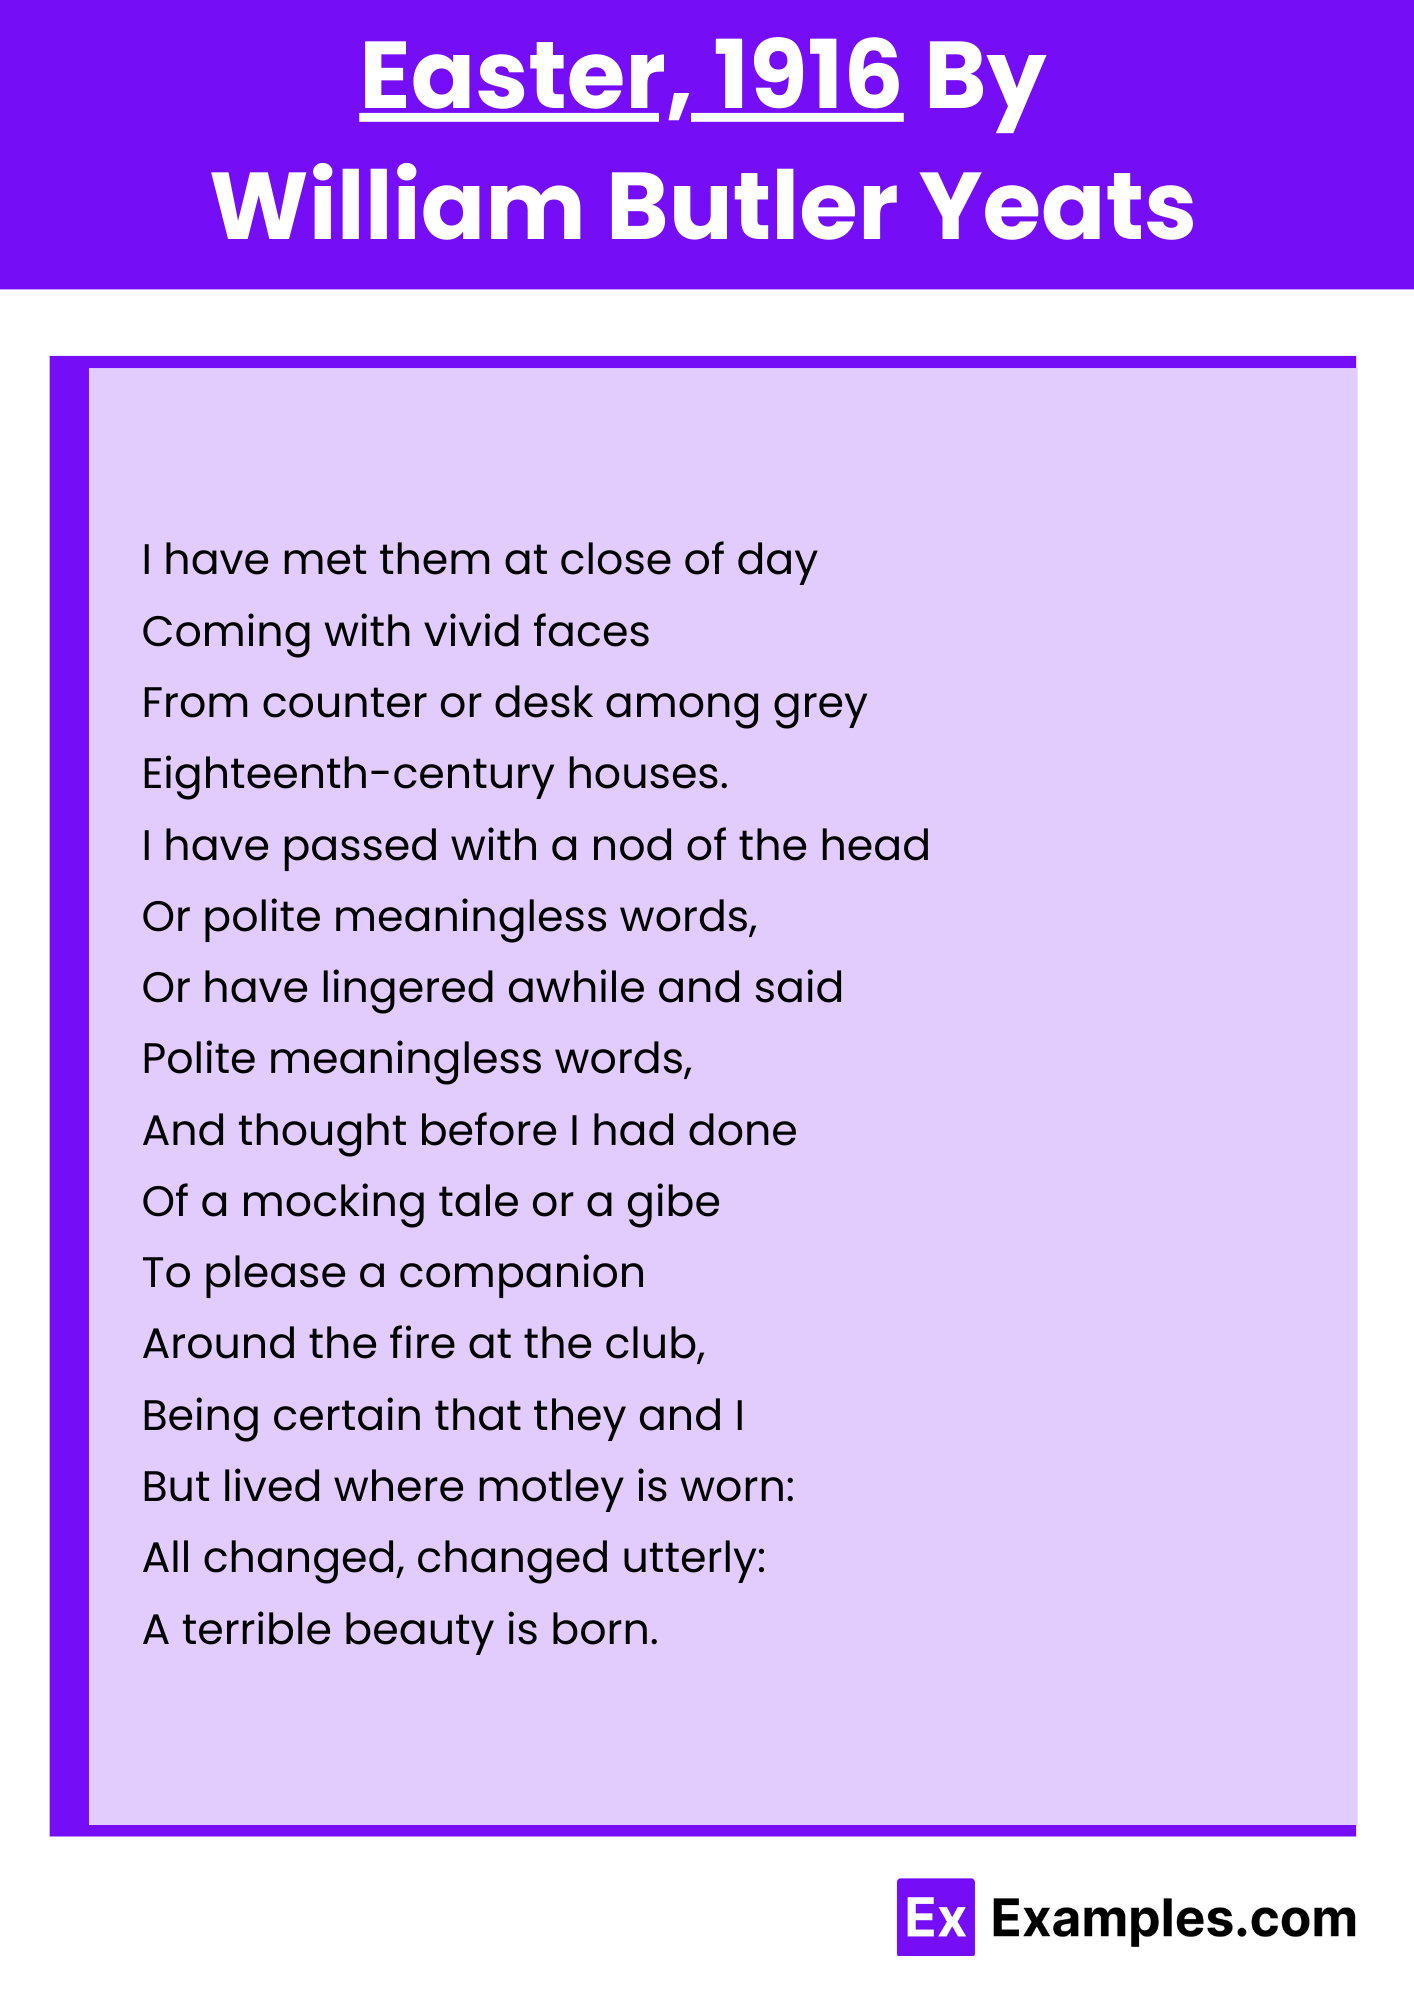 Easter, 1916 By William Butler Yeats